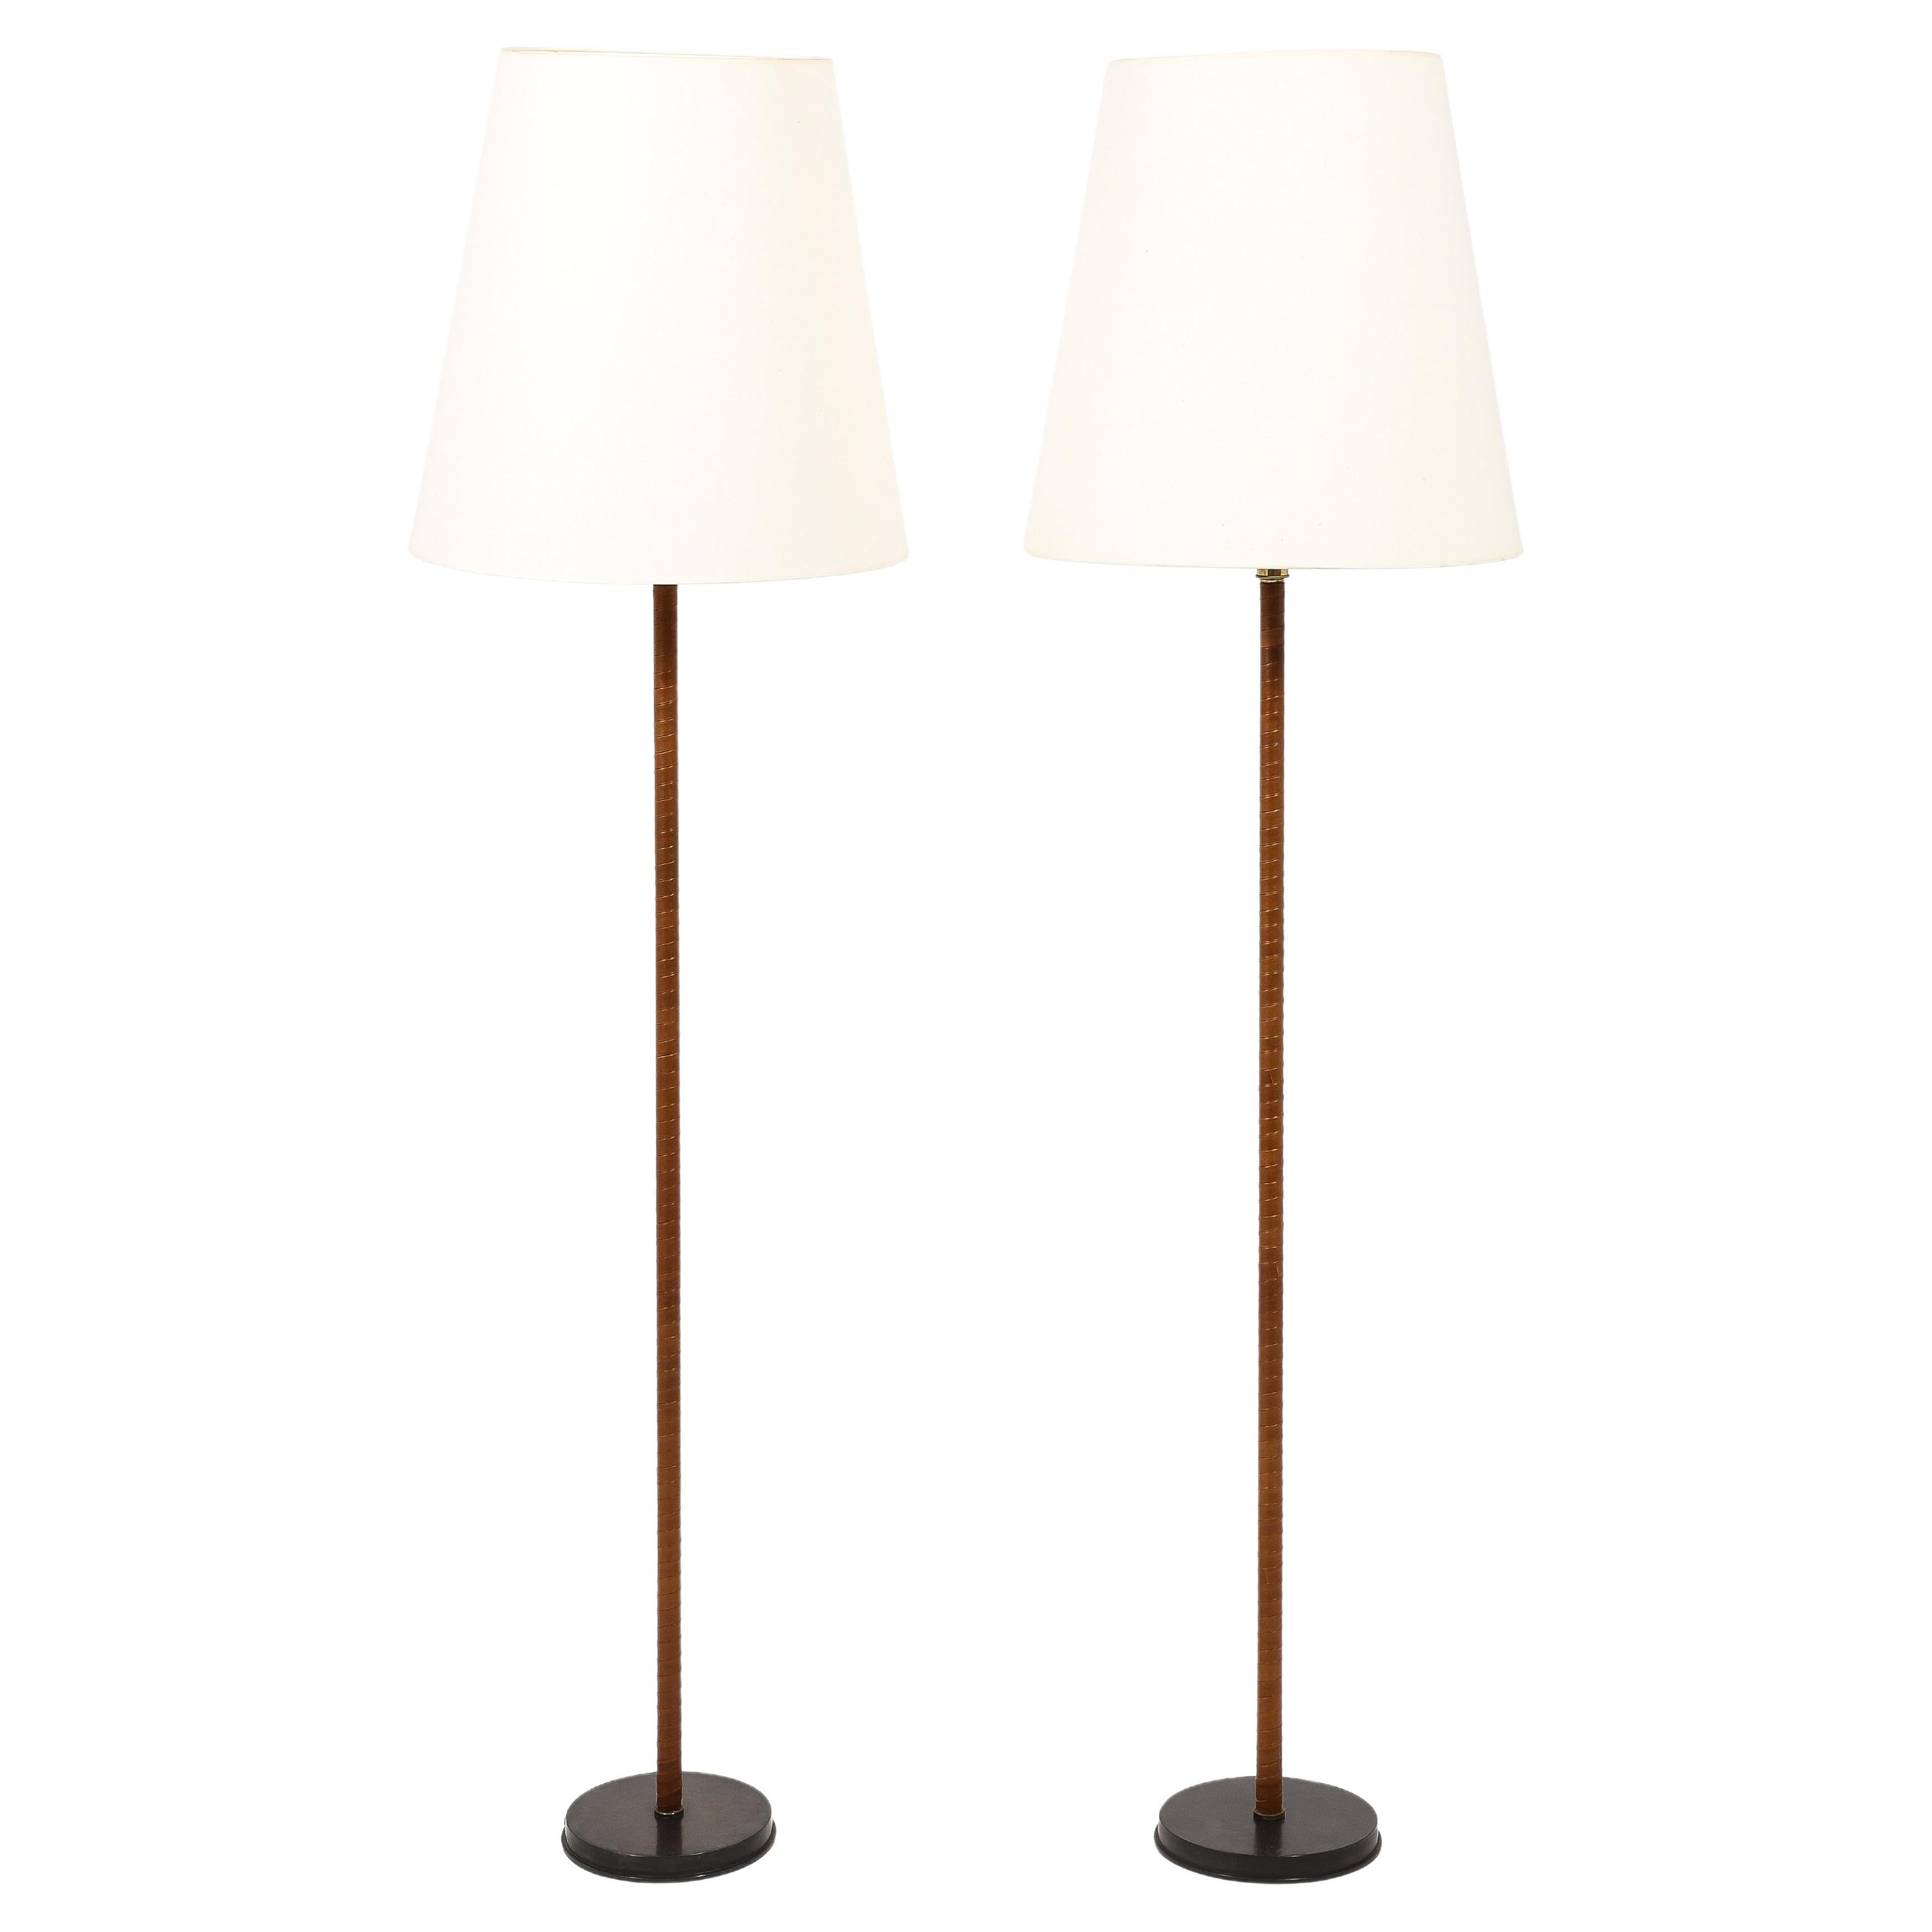 Bronze & Twist Leather Wrapped Floor Lamps, Spain 1950's For Sale